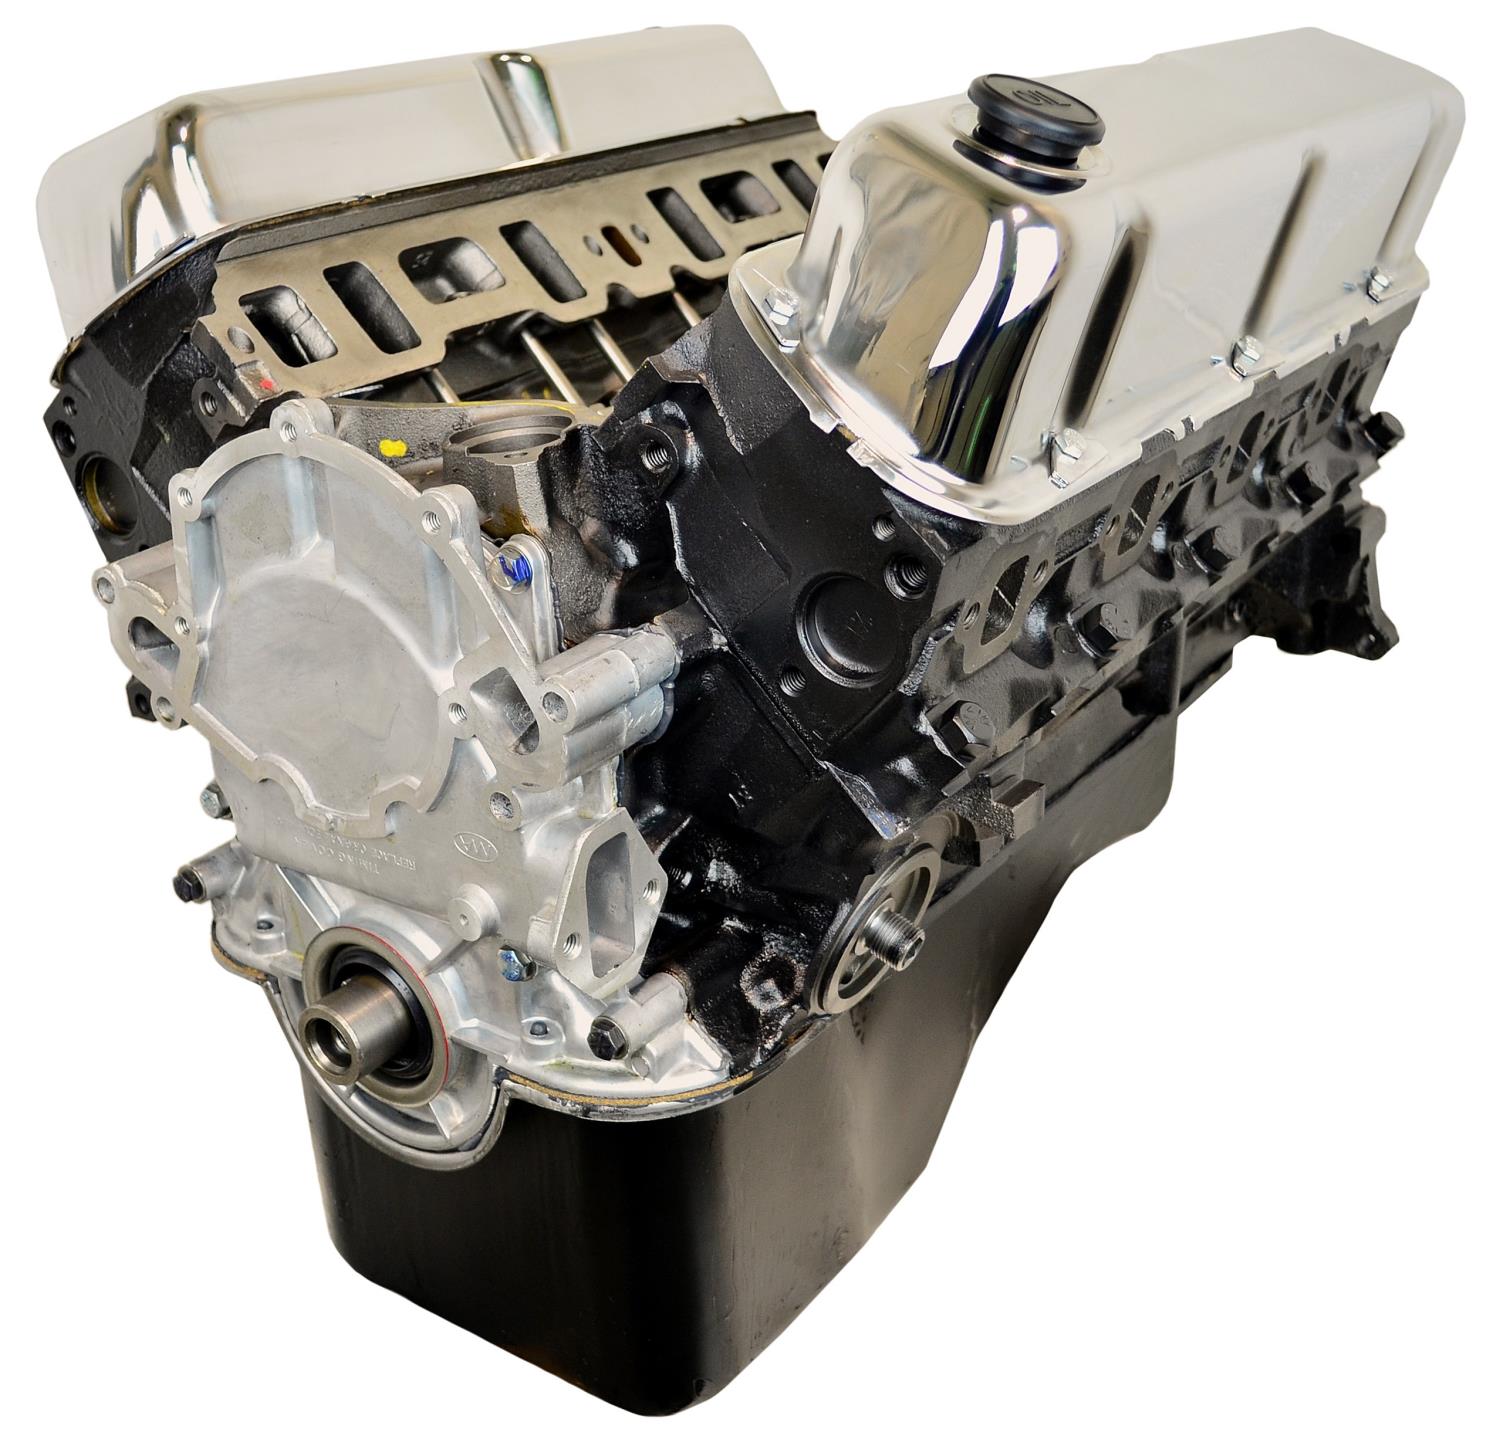 HP09 High Performance Crate Engine Small Block Ford 351W / 300HP / 377TQ